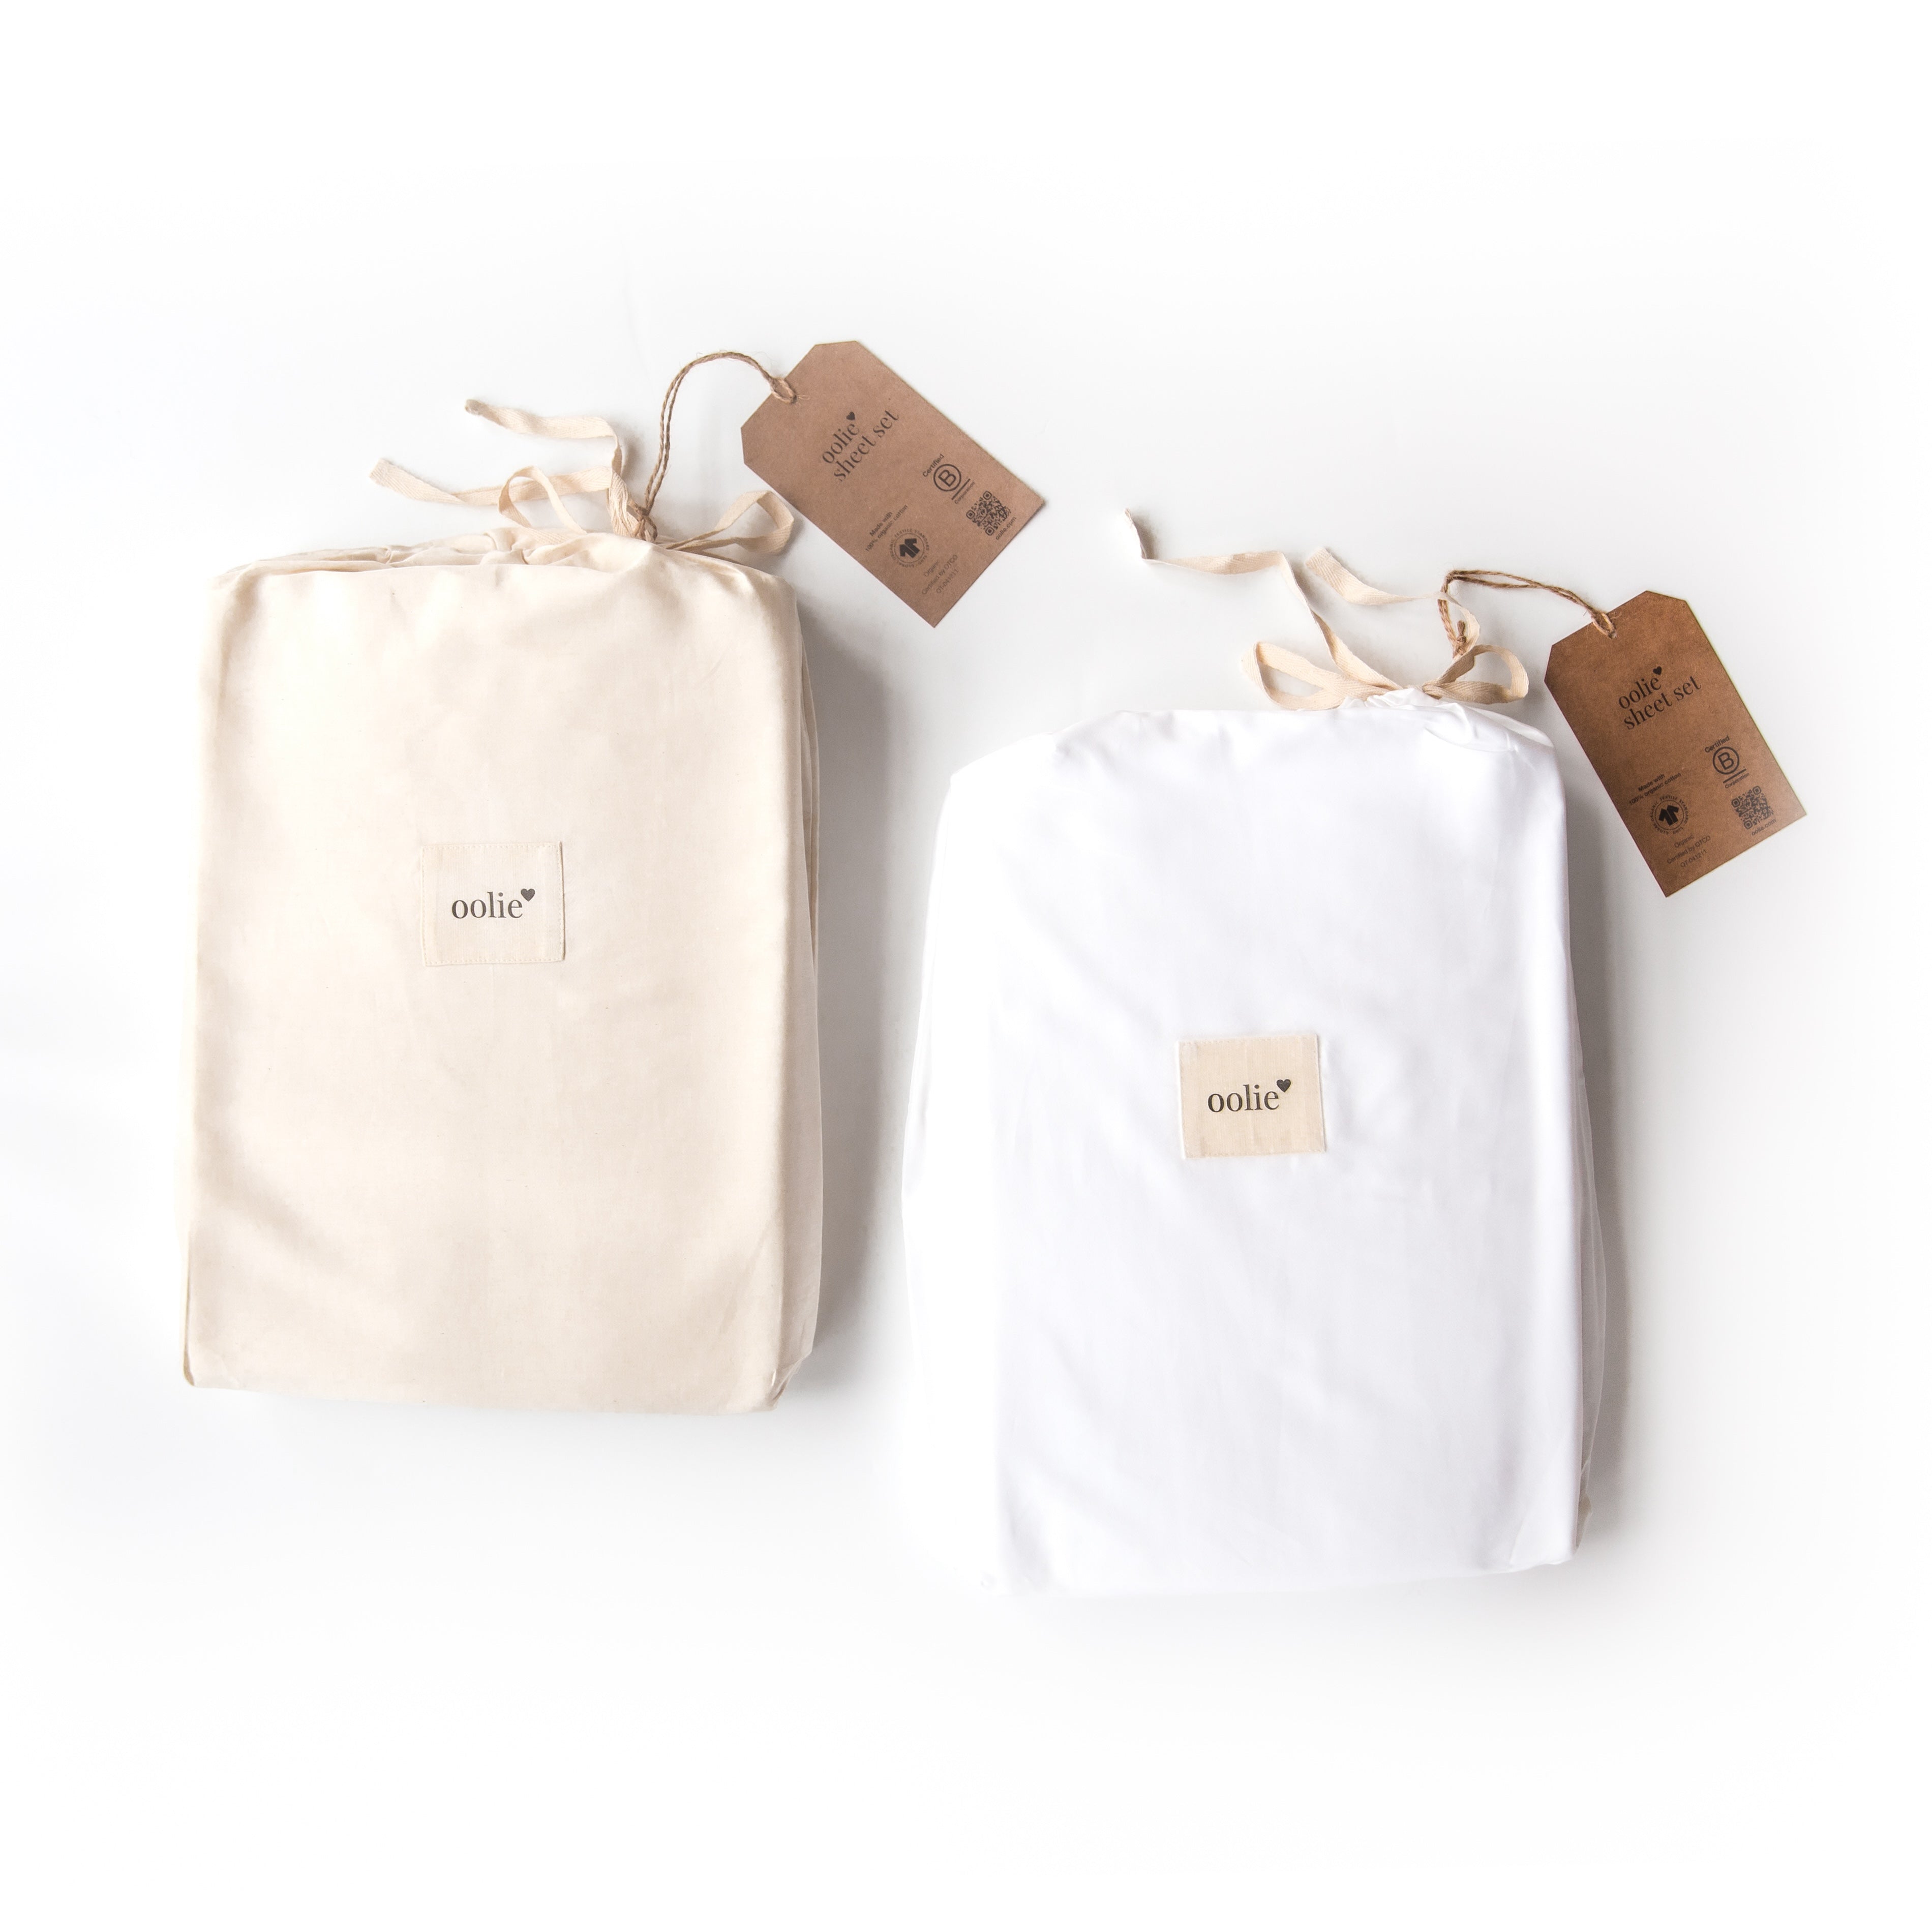 Two Oolie organic cotton sheet sets, one natural and one white, shown on a white background. Both are folded and packaged in fabric bags with recycled kraft paper hang tags.